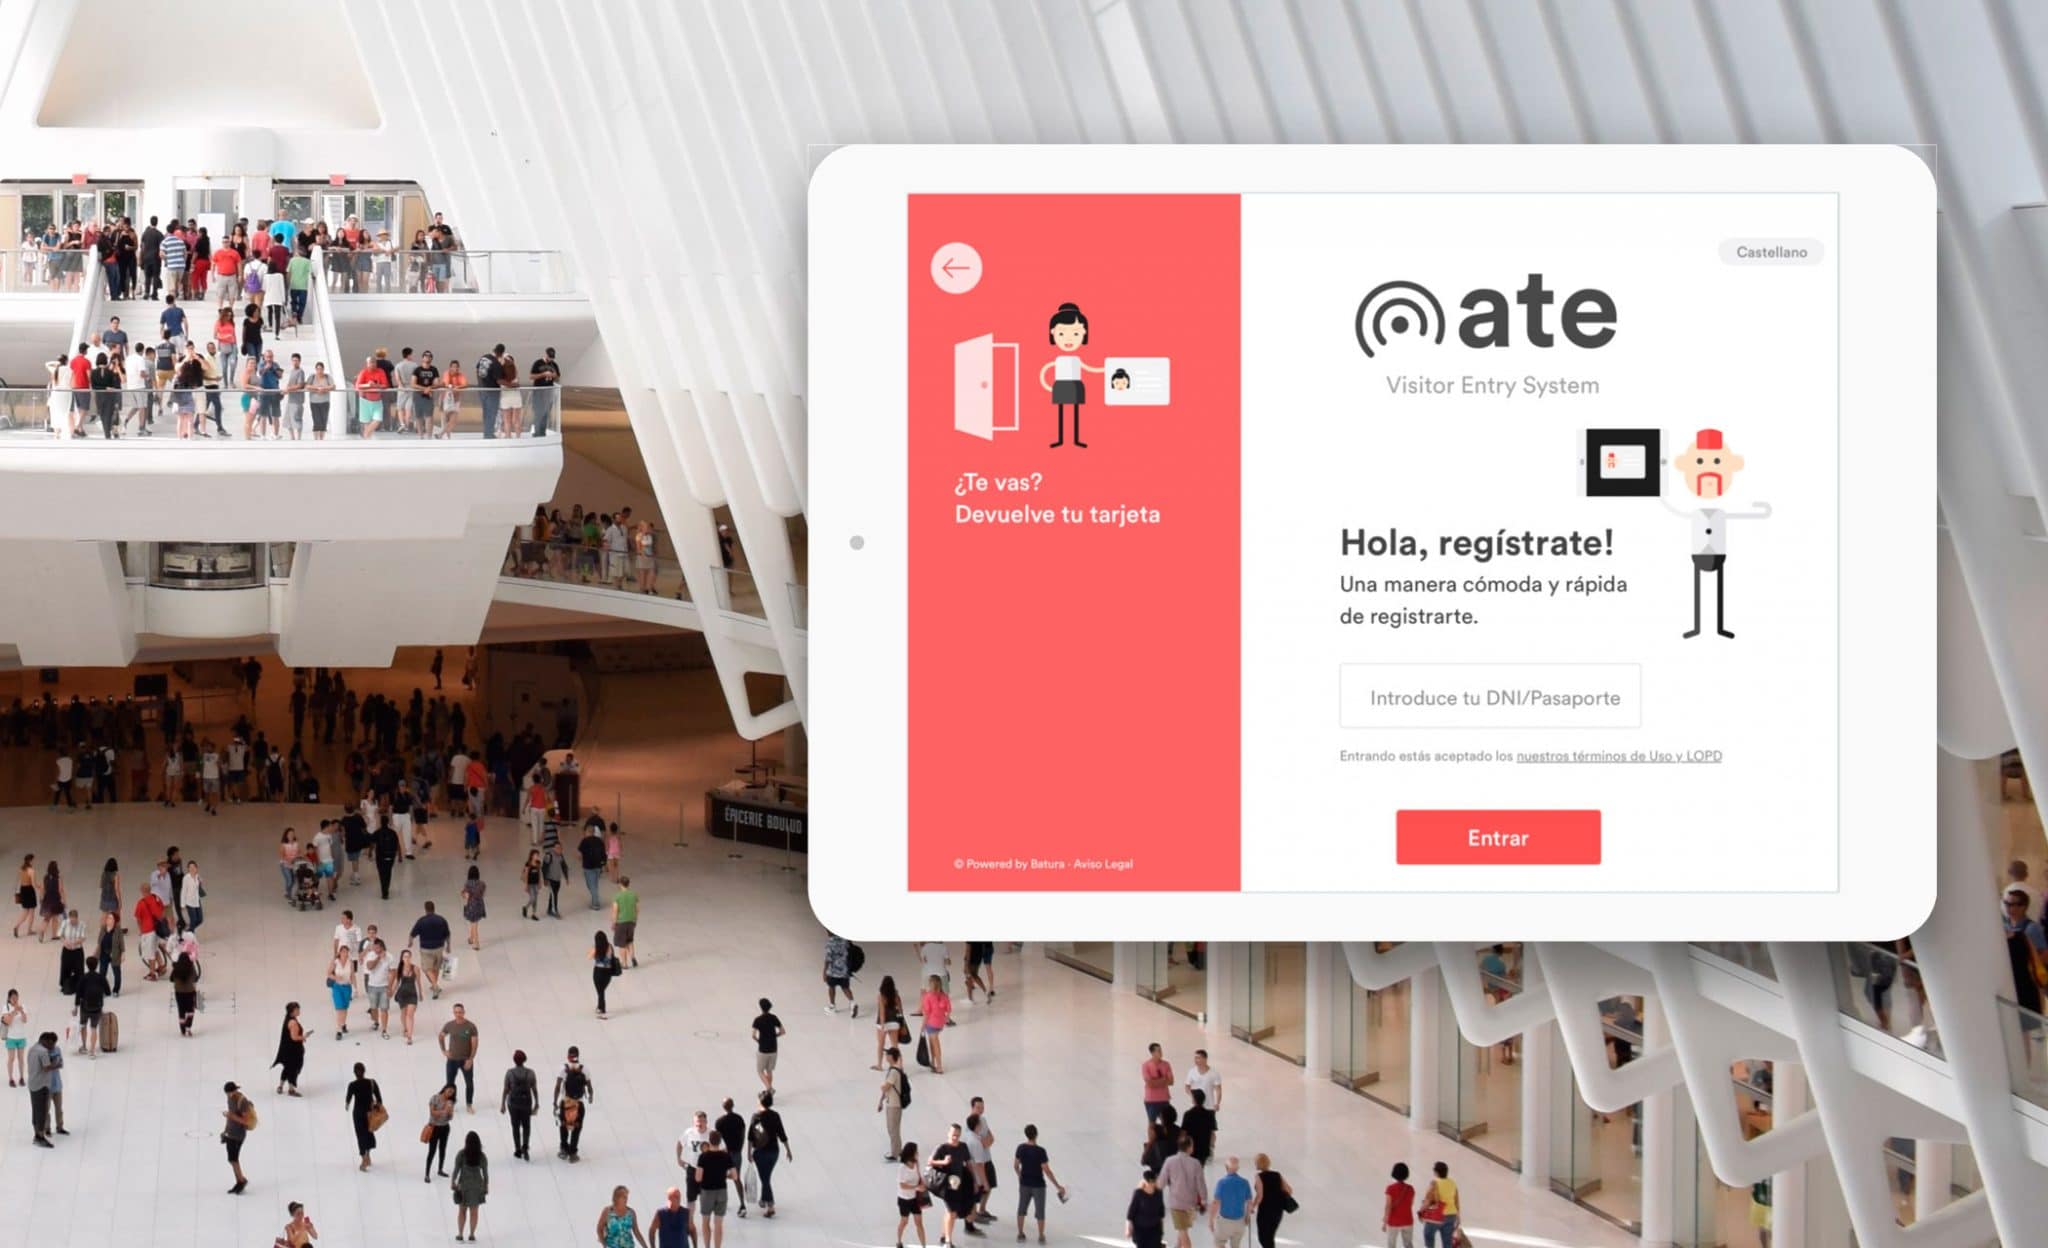 ATE — Visitor Entry System